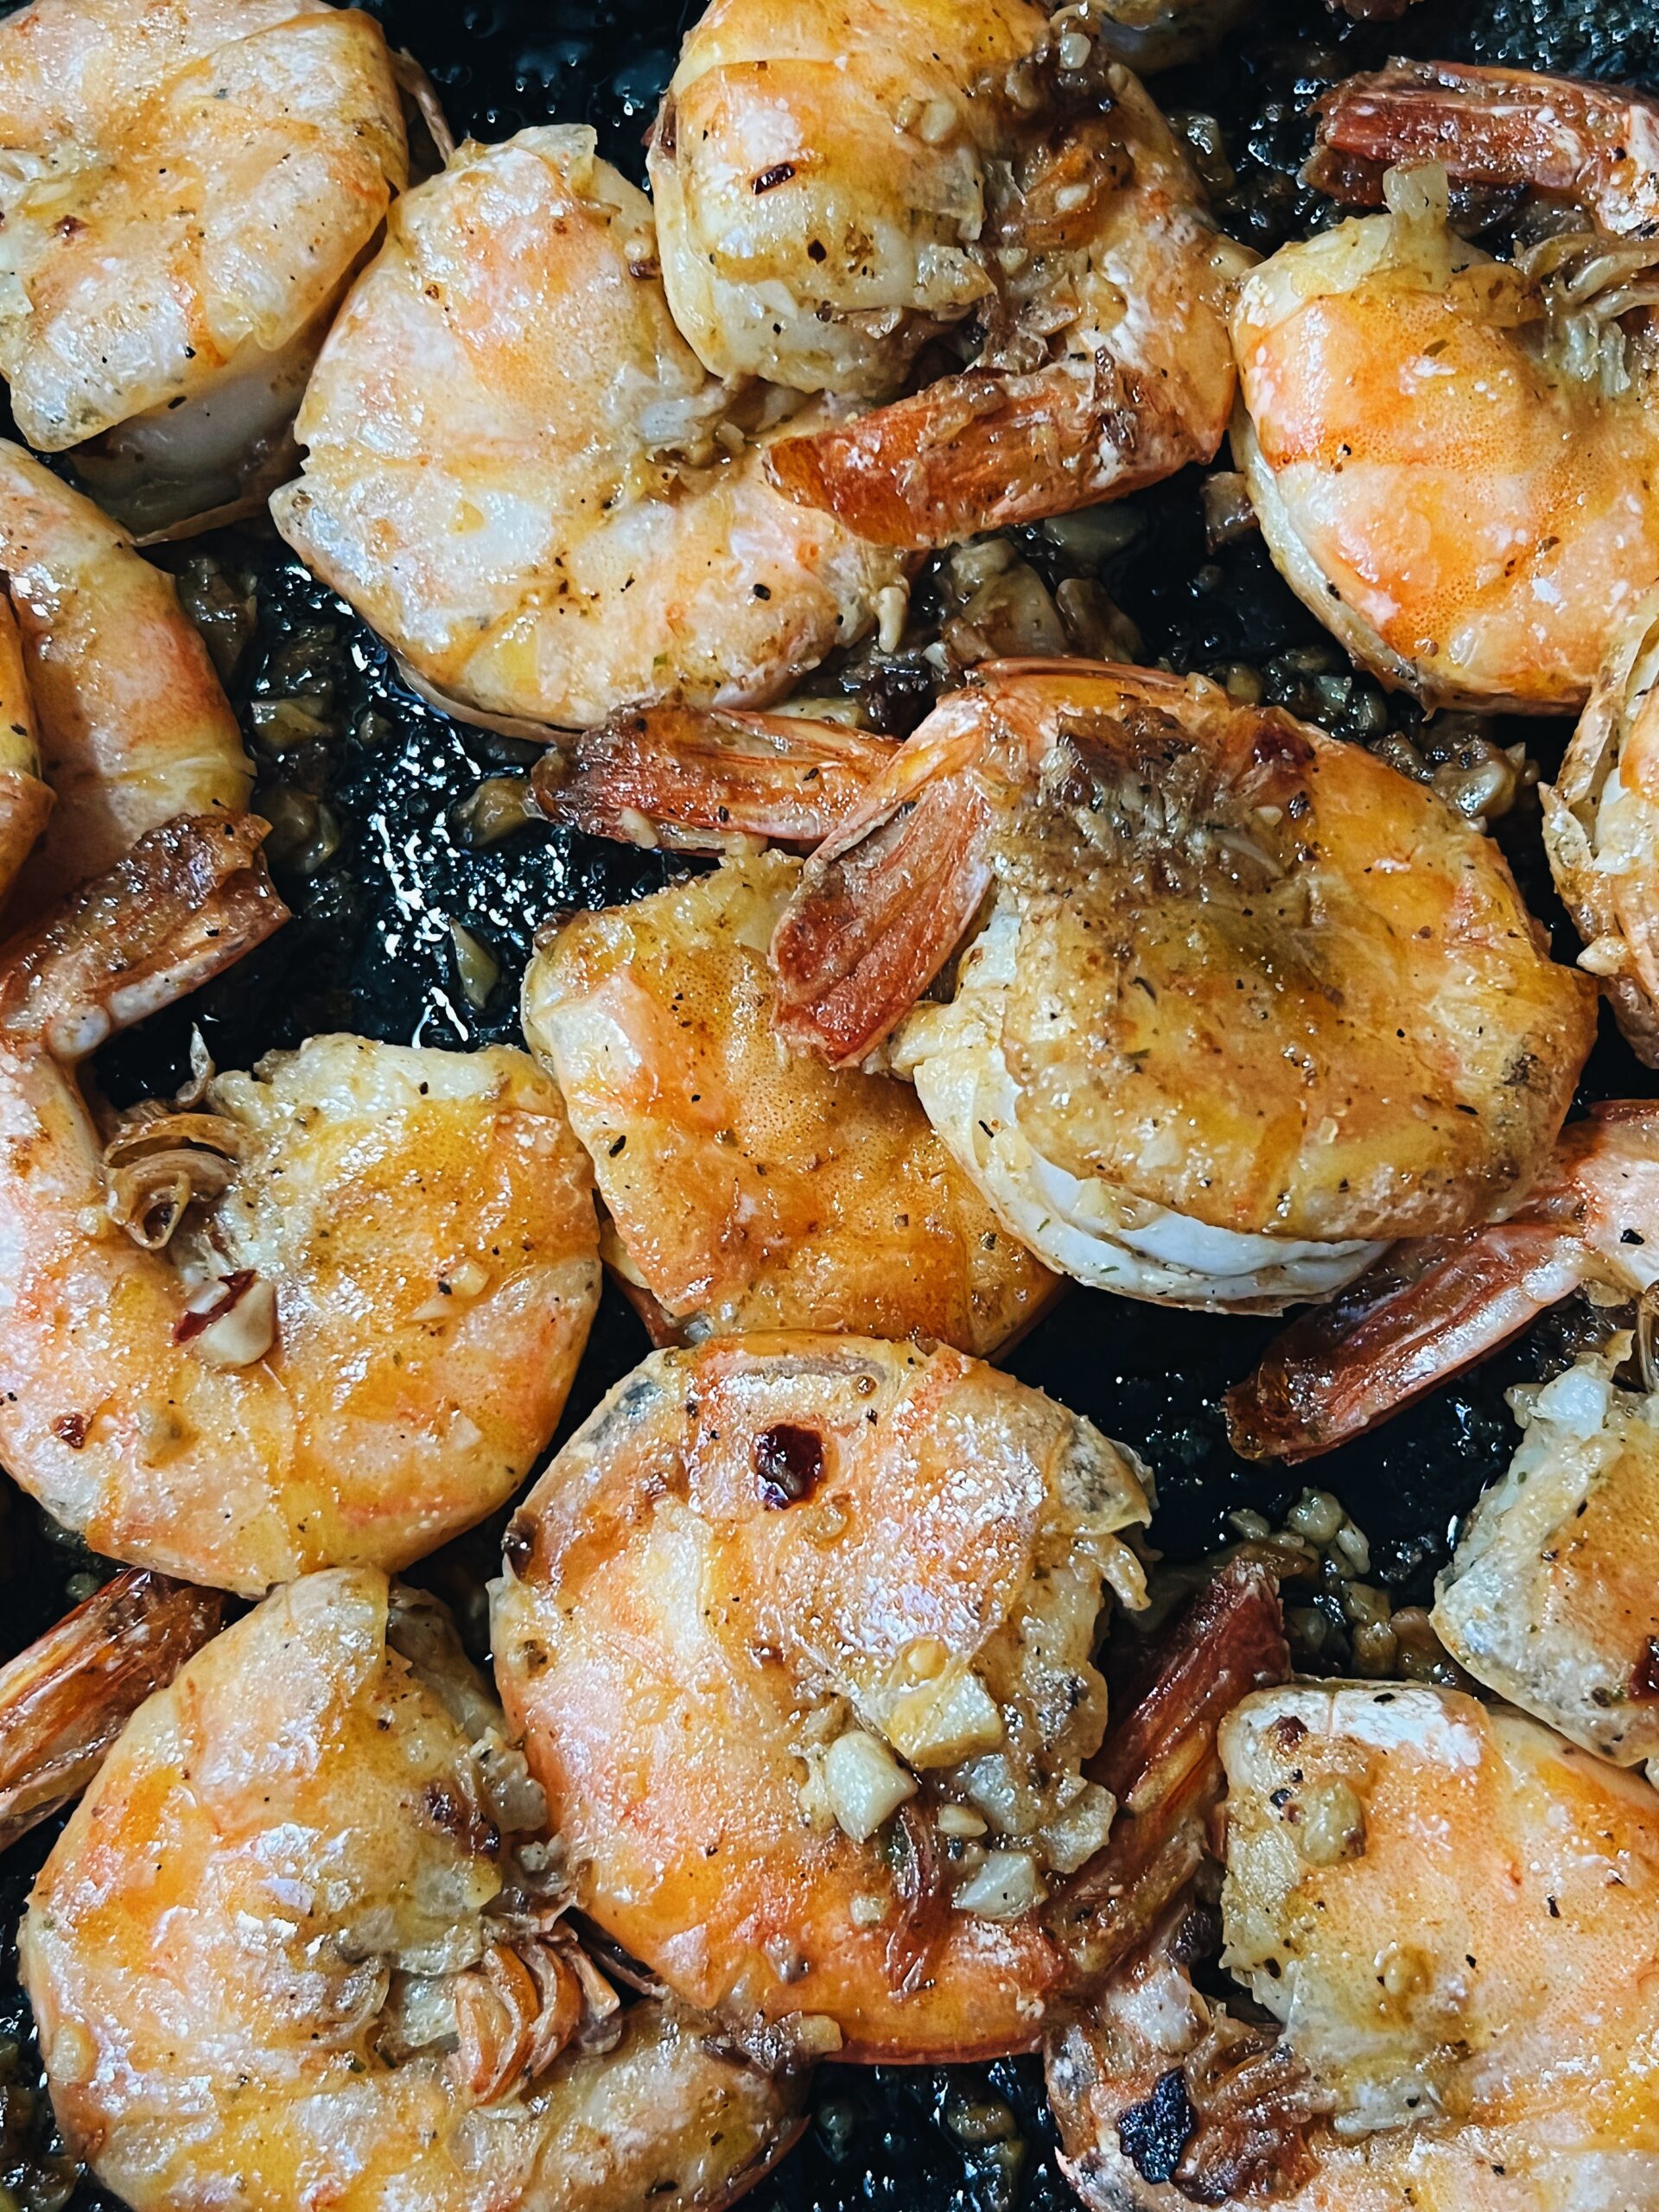 cooked shrimp with shell on, cooked with garlic in a hot skilled pan